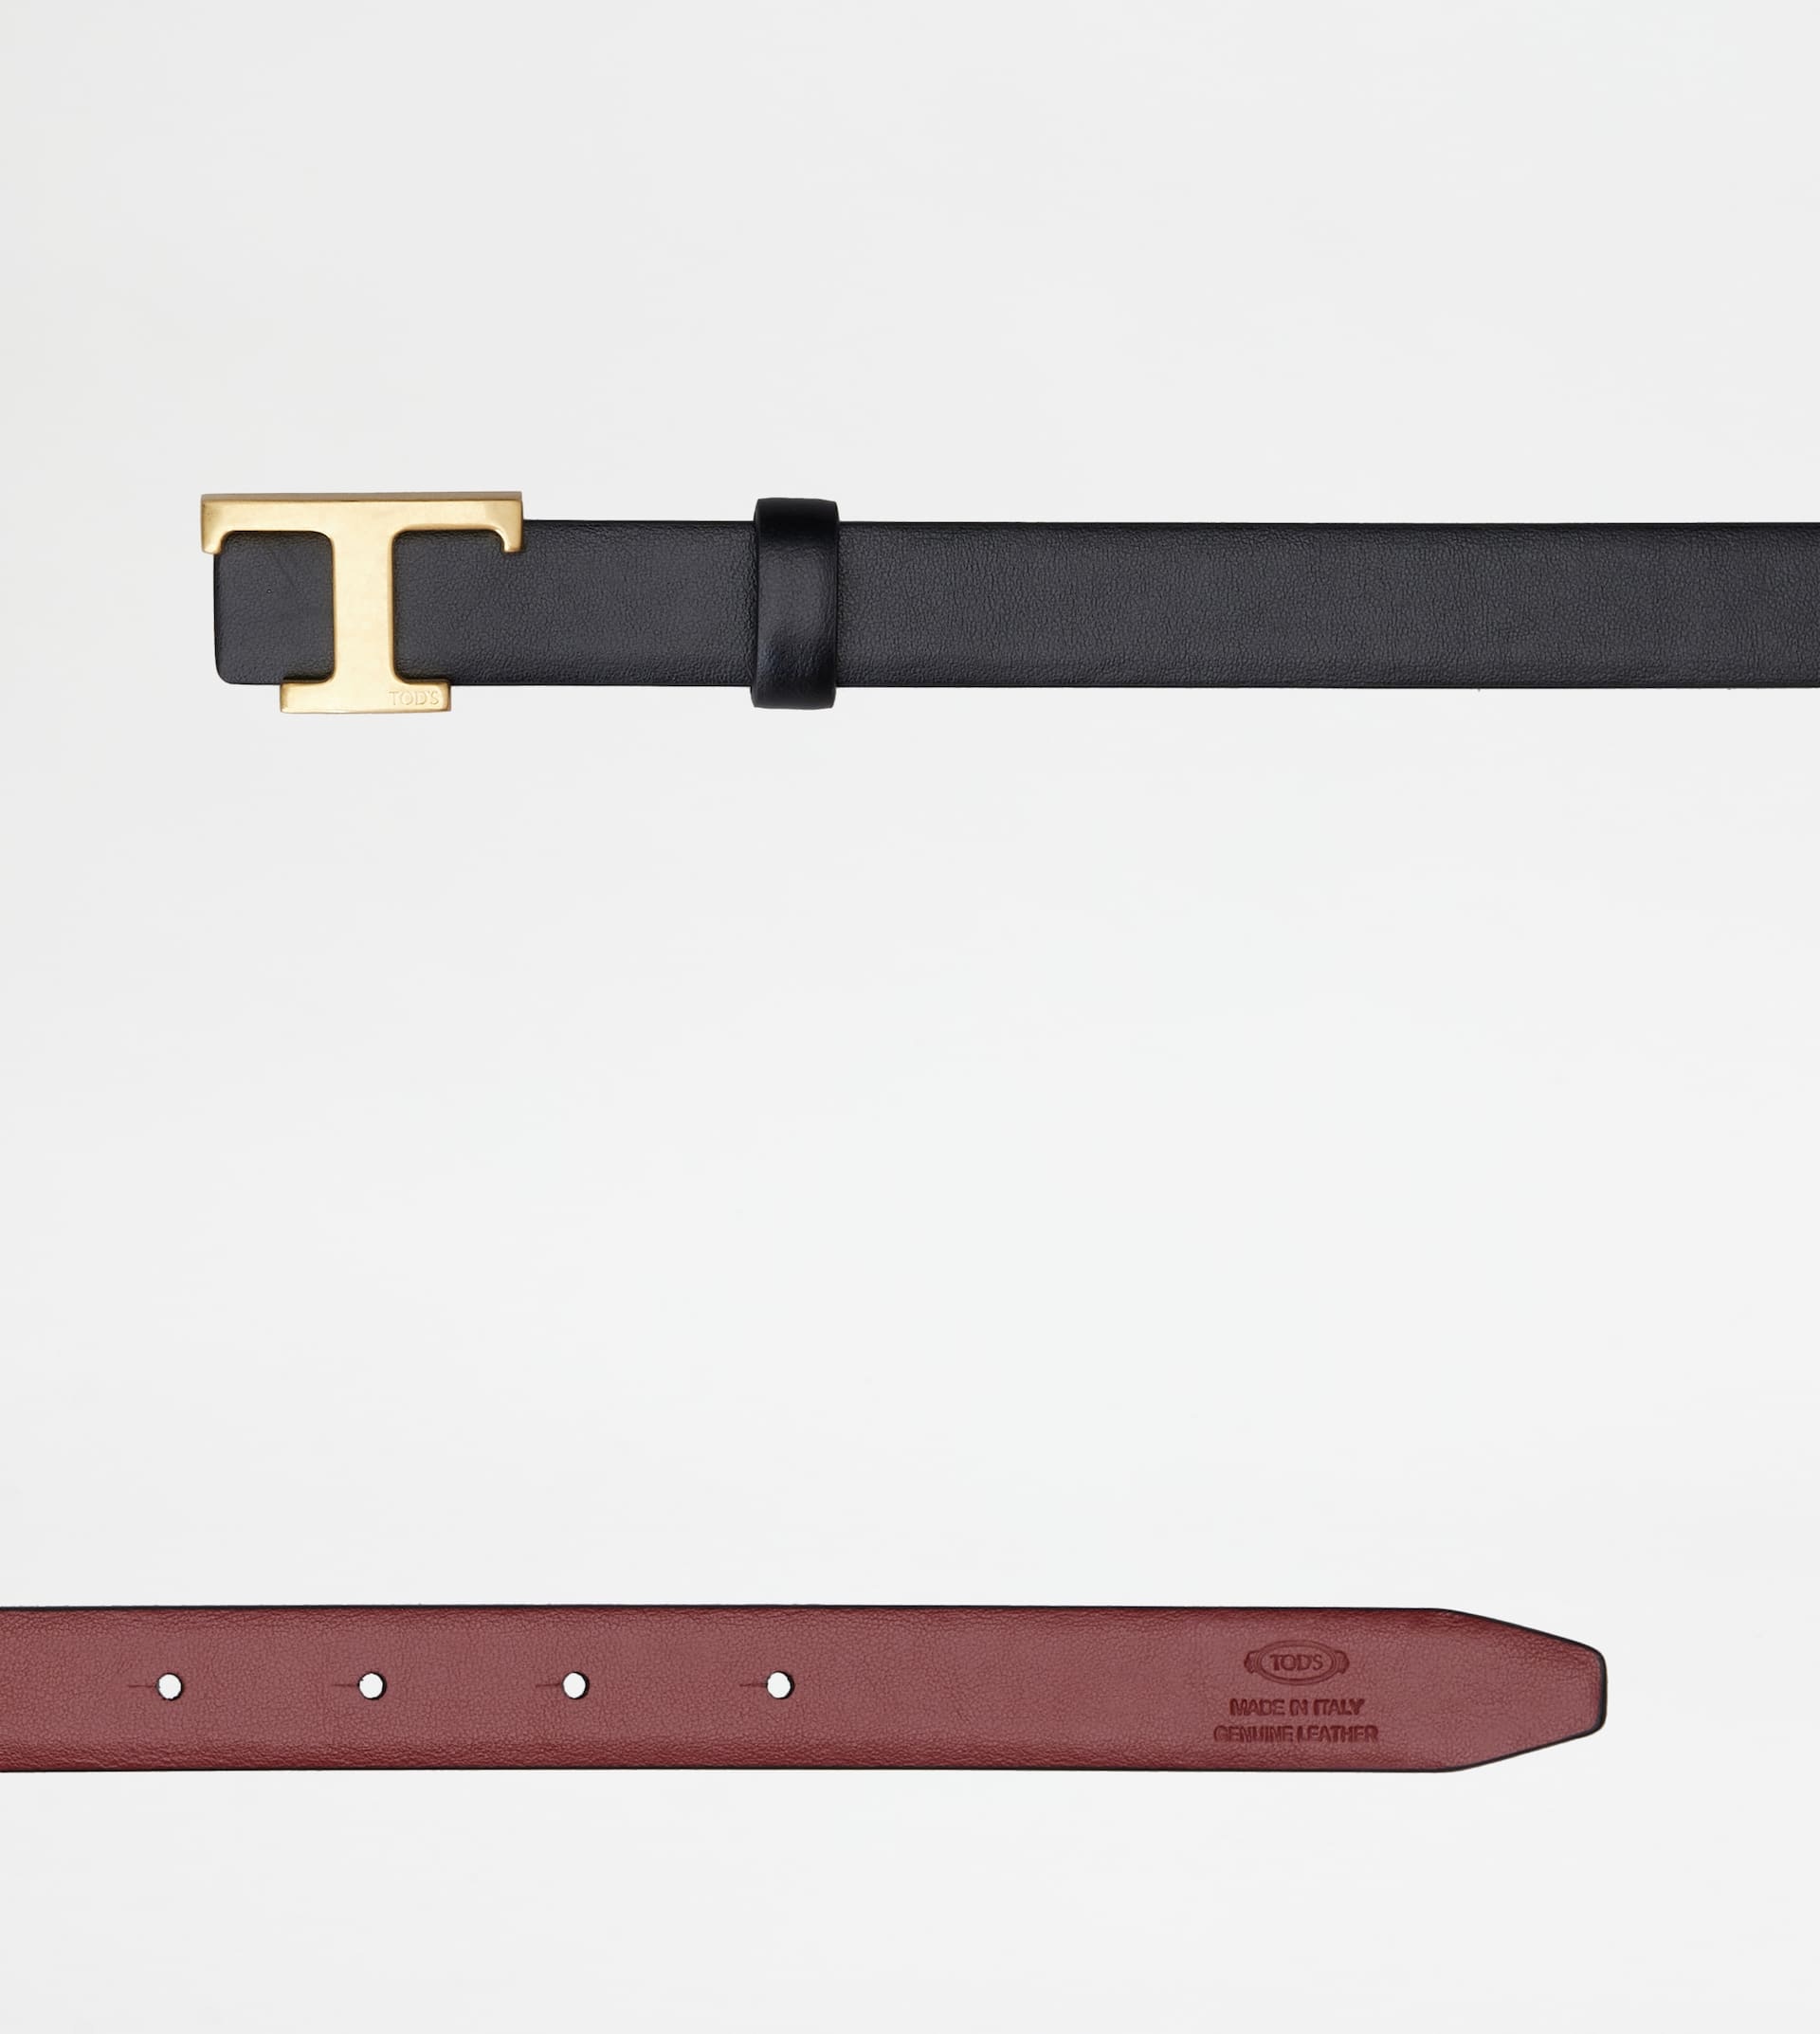 T TIMELESS REVERSIBLE BELT IN LEATHER - BLACK, RED - 3